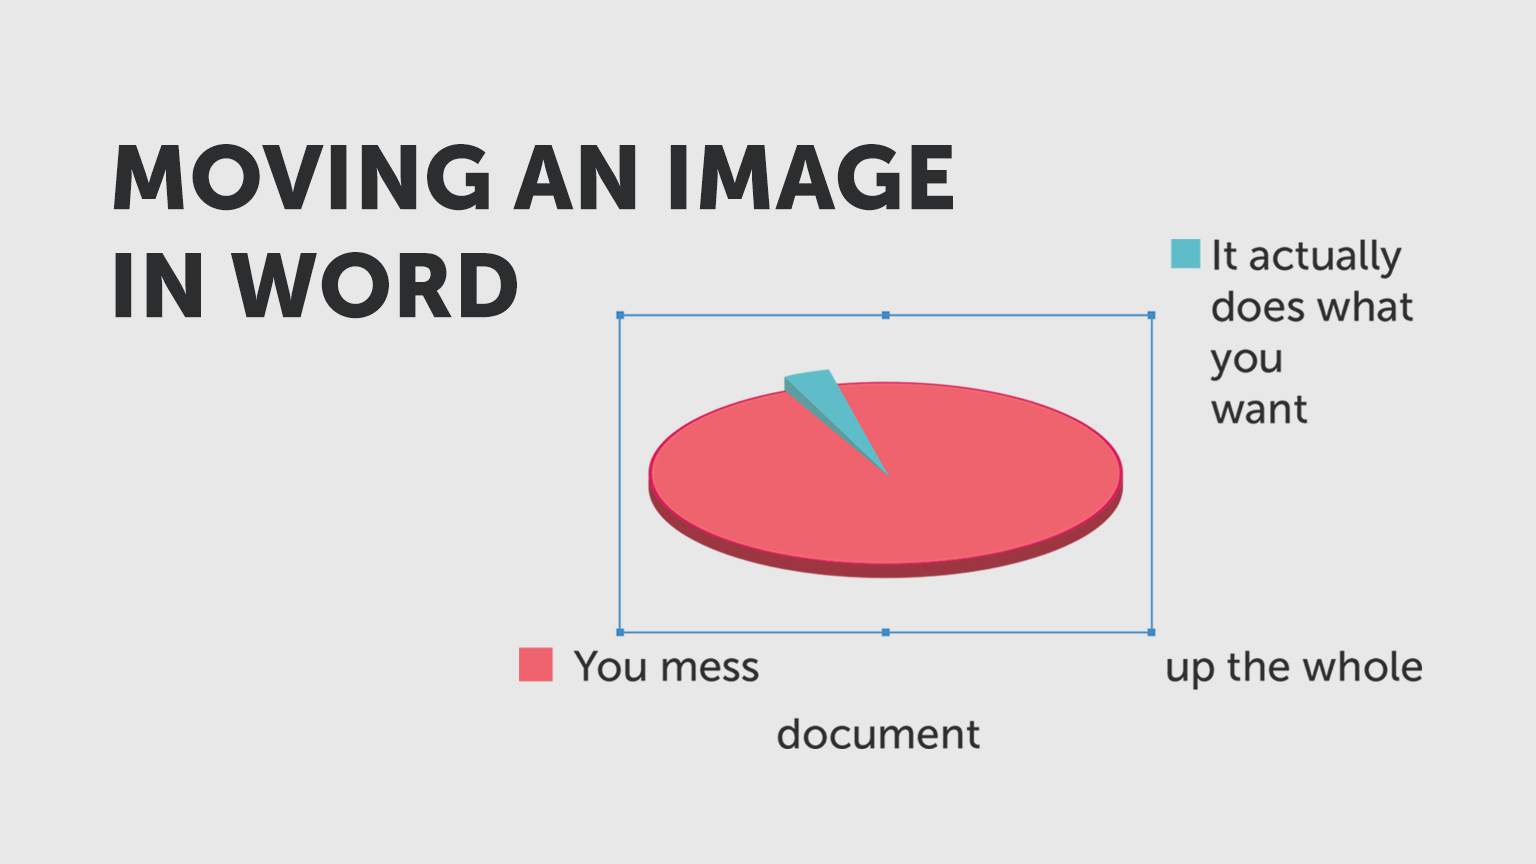 Moving an image in Word